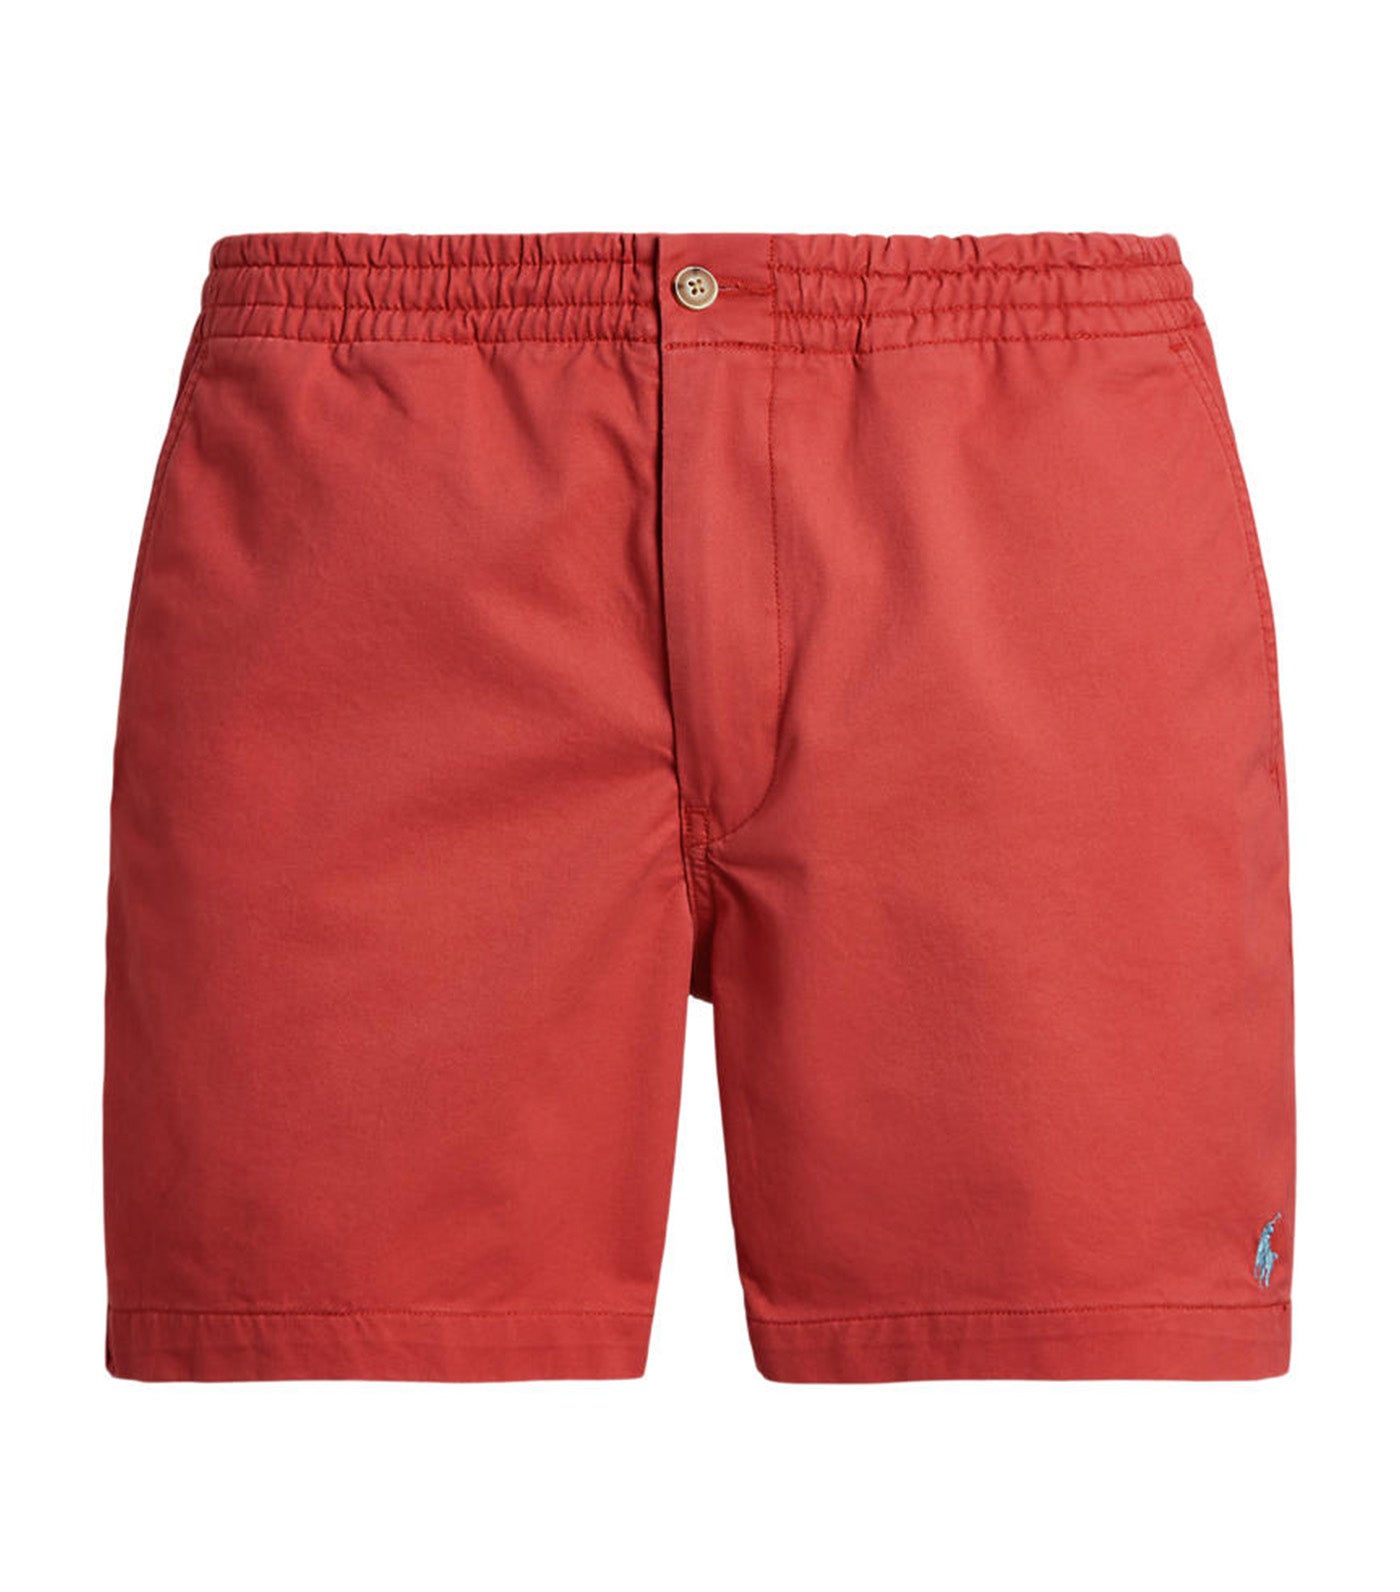 Men's 6-Inch Polo Prepster Stretch Chino Shorts Red